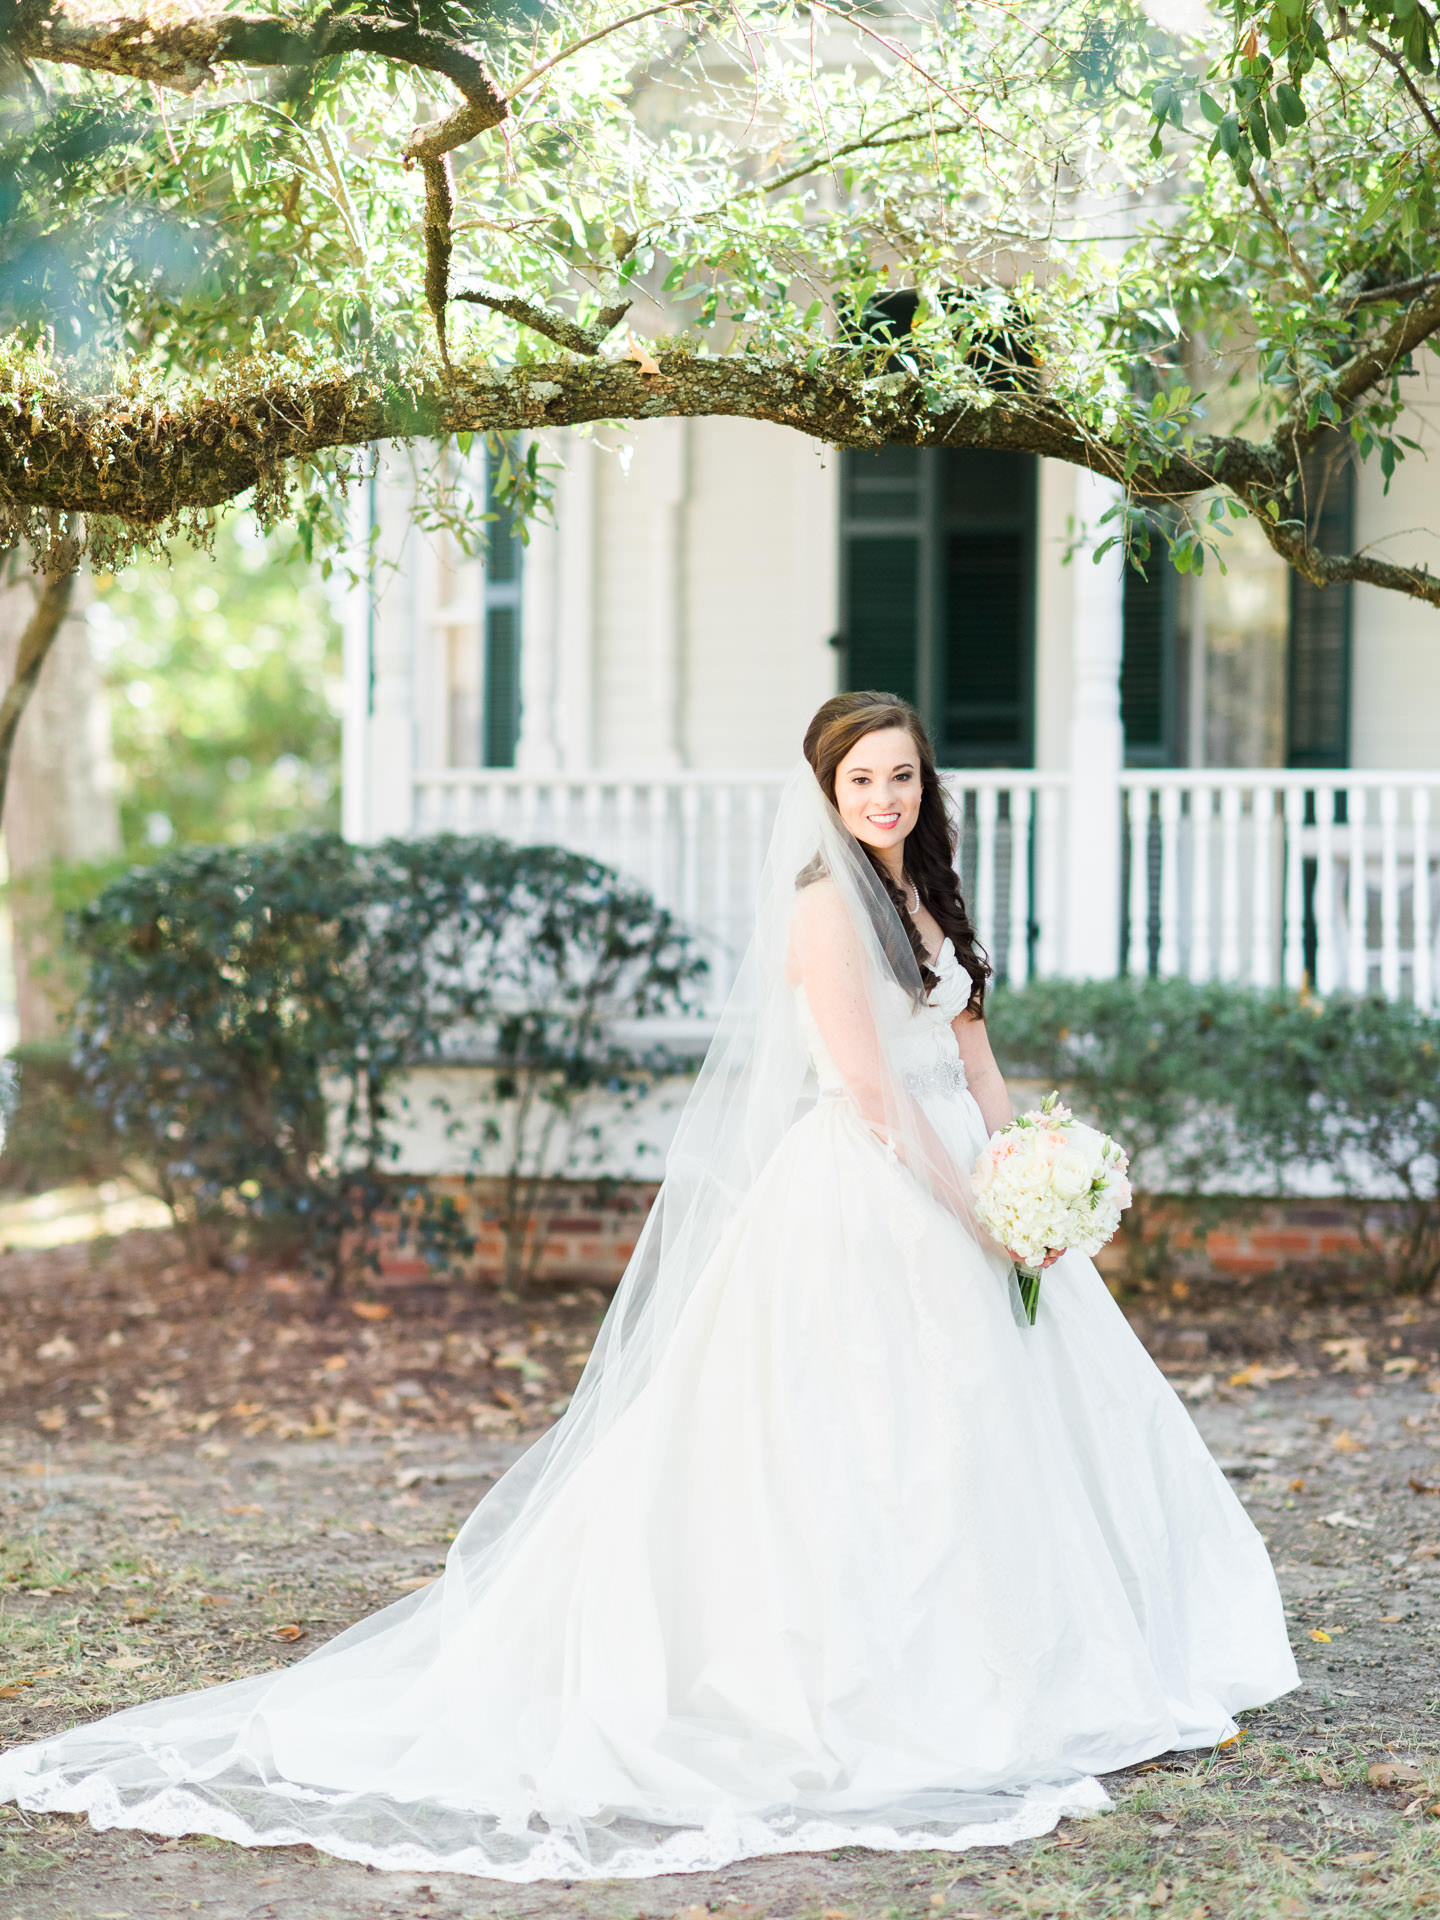 Mississippi Bride with cathedral veil smiling